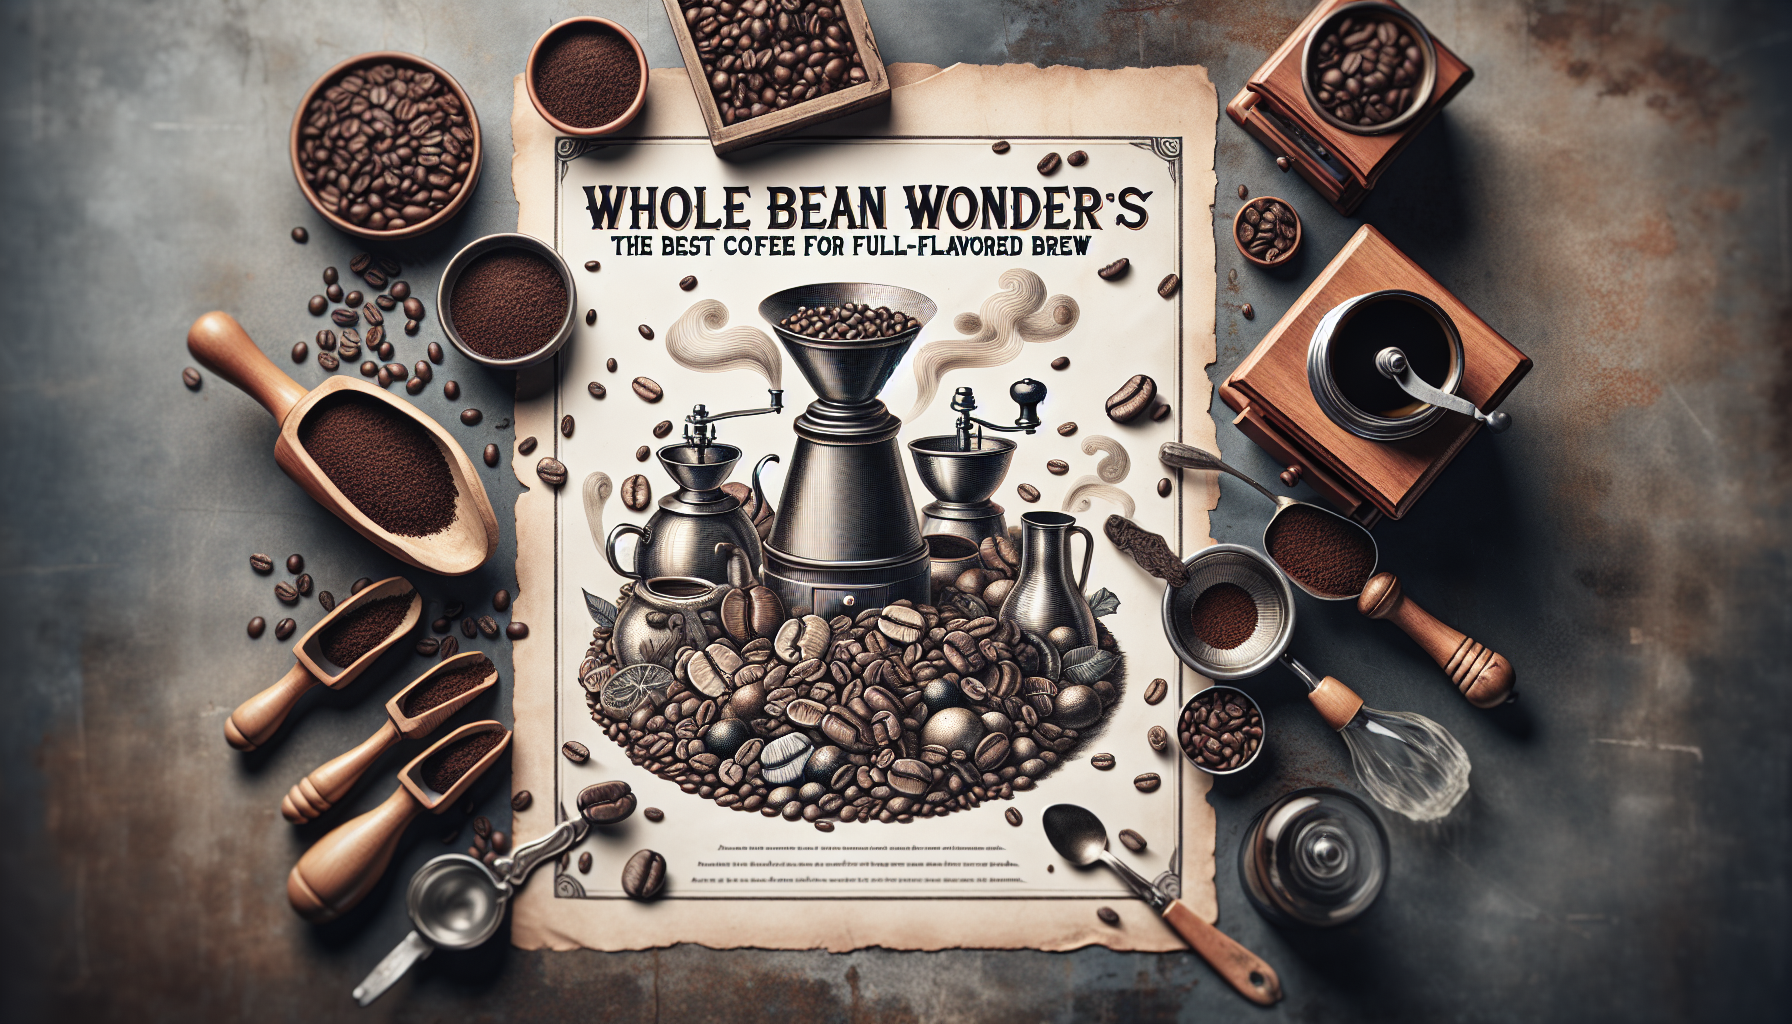 Visualize an aesthetically pleasing depiction of a variety of coffee beans. The beans should be spread out, with each exhibiting a unique texture and color that indicates its flavor profile. The backd